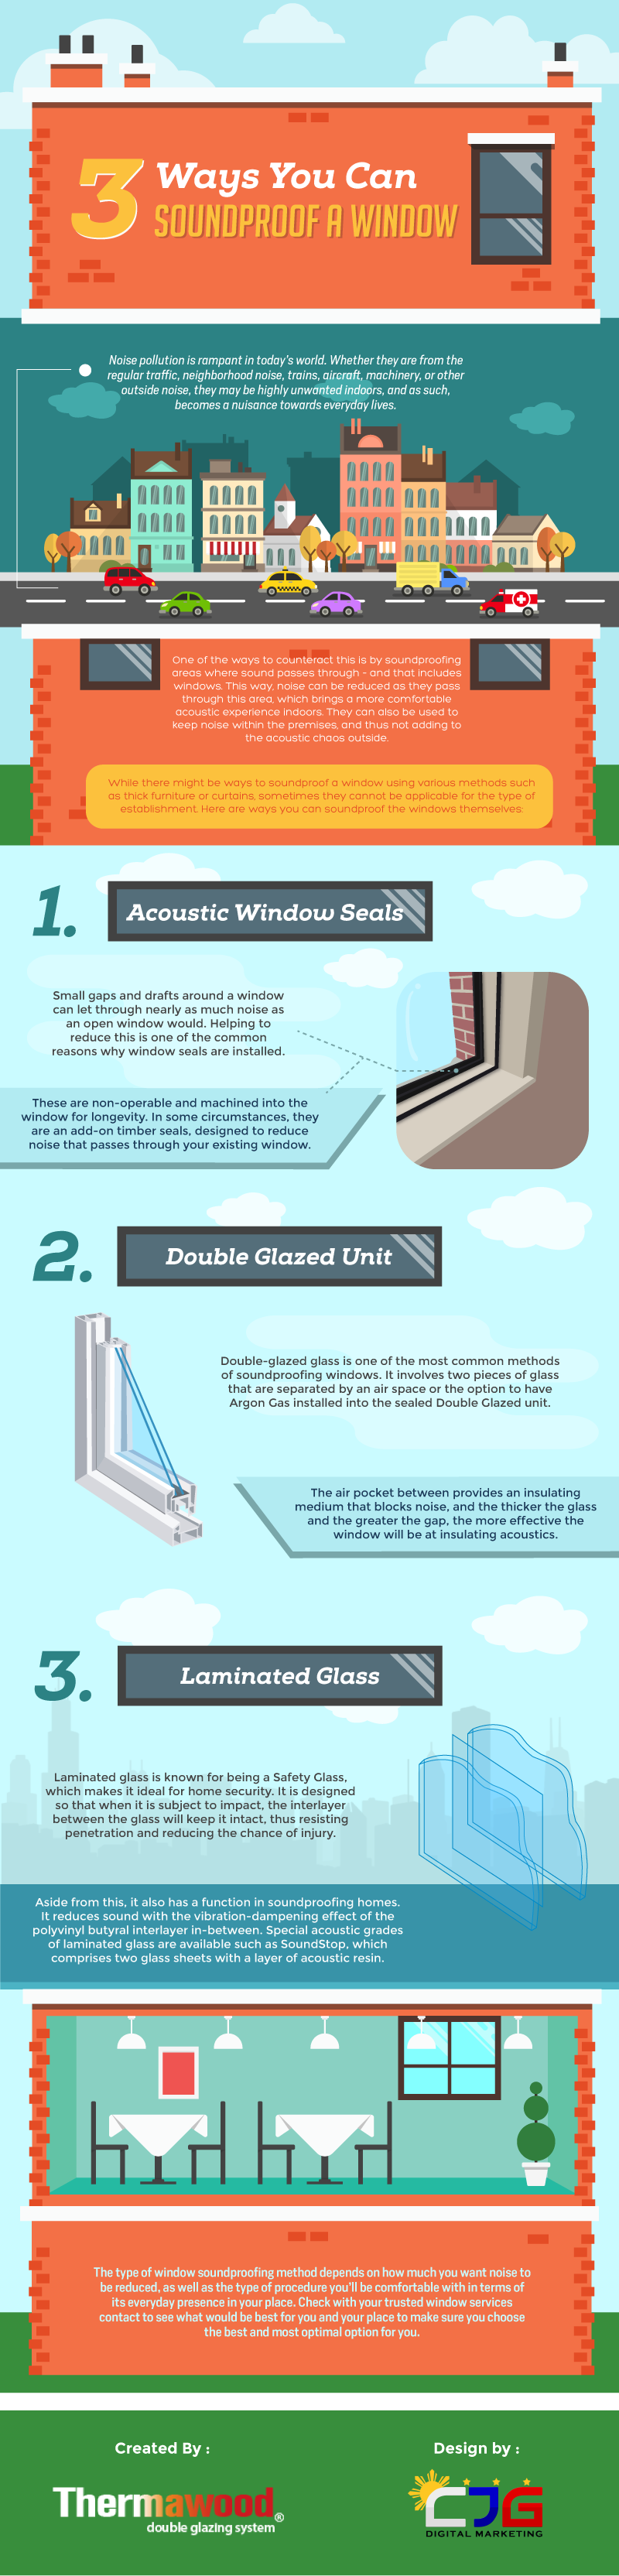 3 Ways You Can Soundproof a Window-01